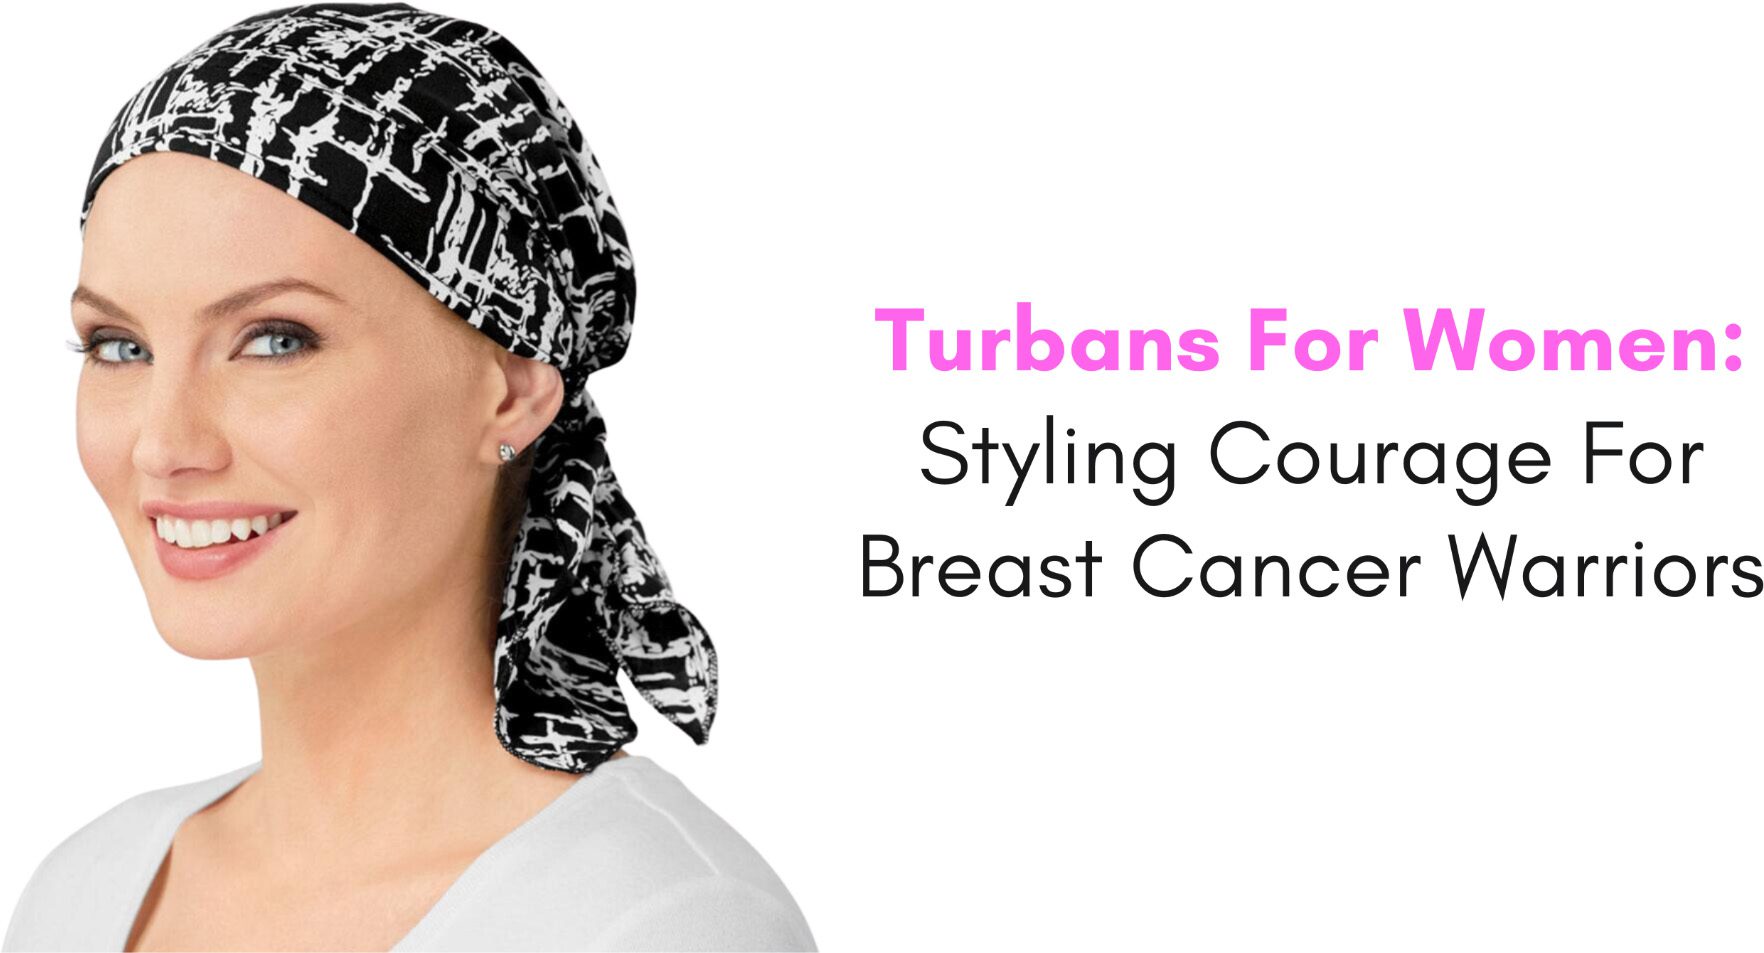 turbans for women styling courage for breast cancer warriors